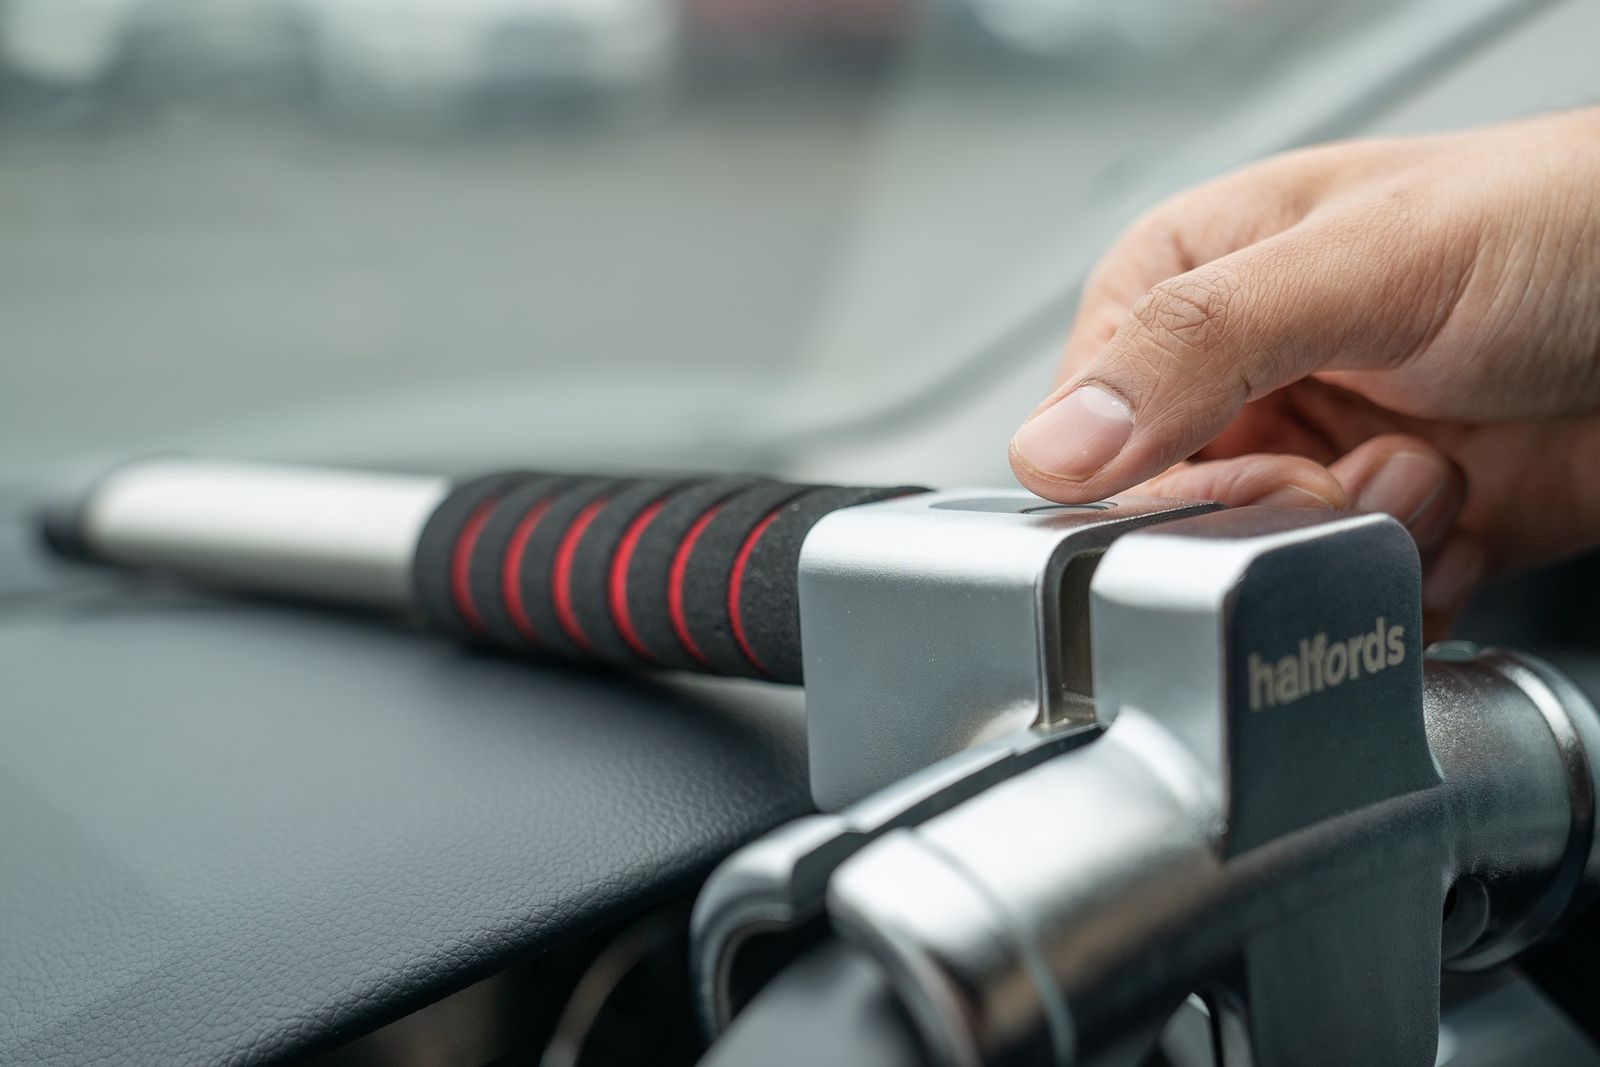 Halfords has put a fingerprint reader on a steering wheel lock for the first time image 1